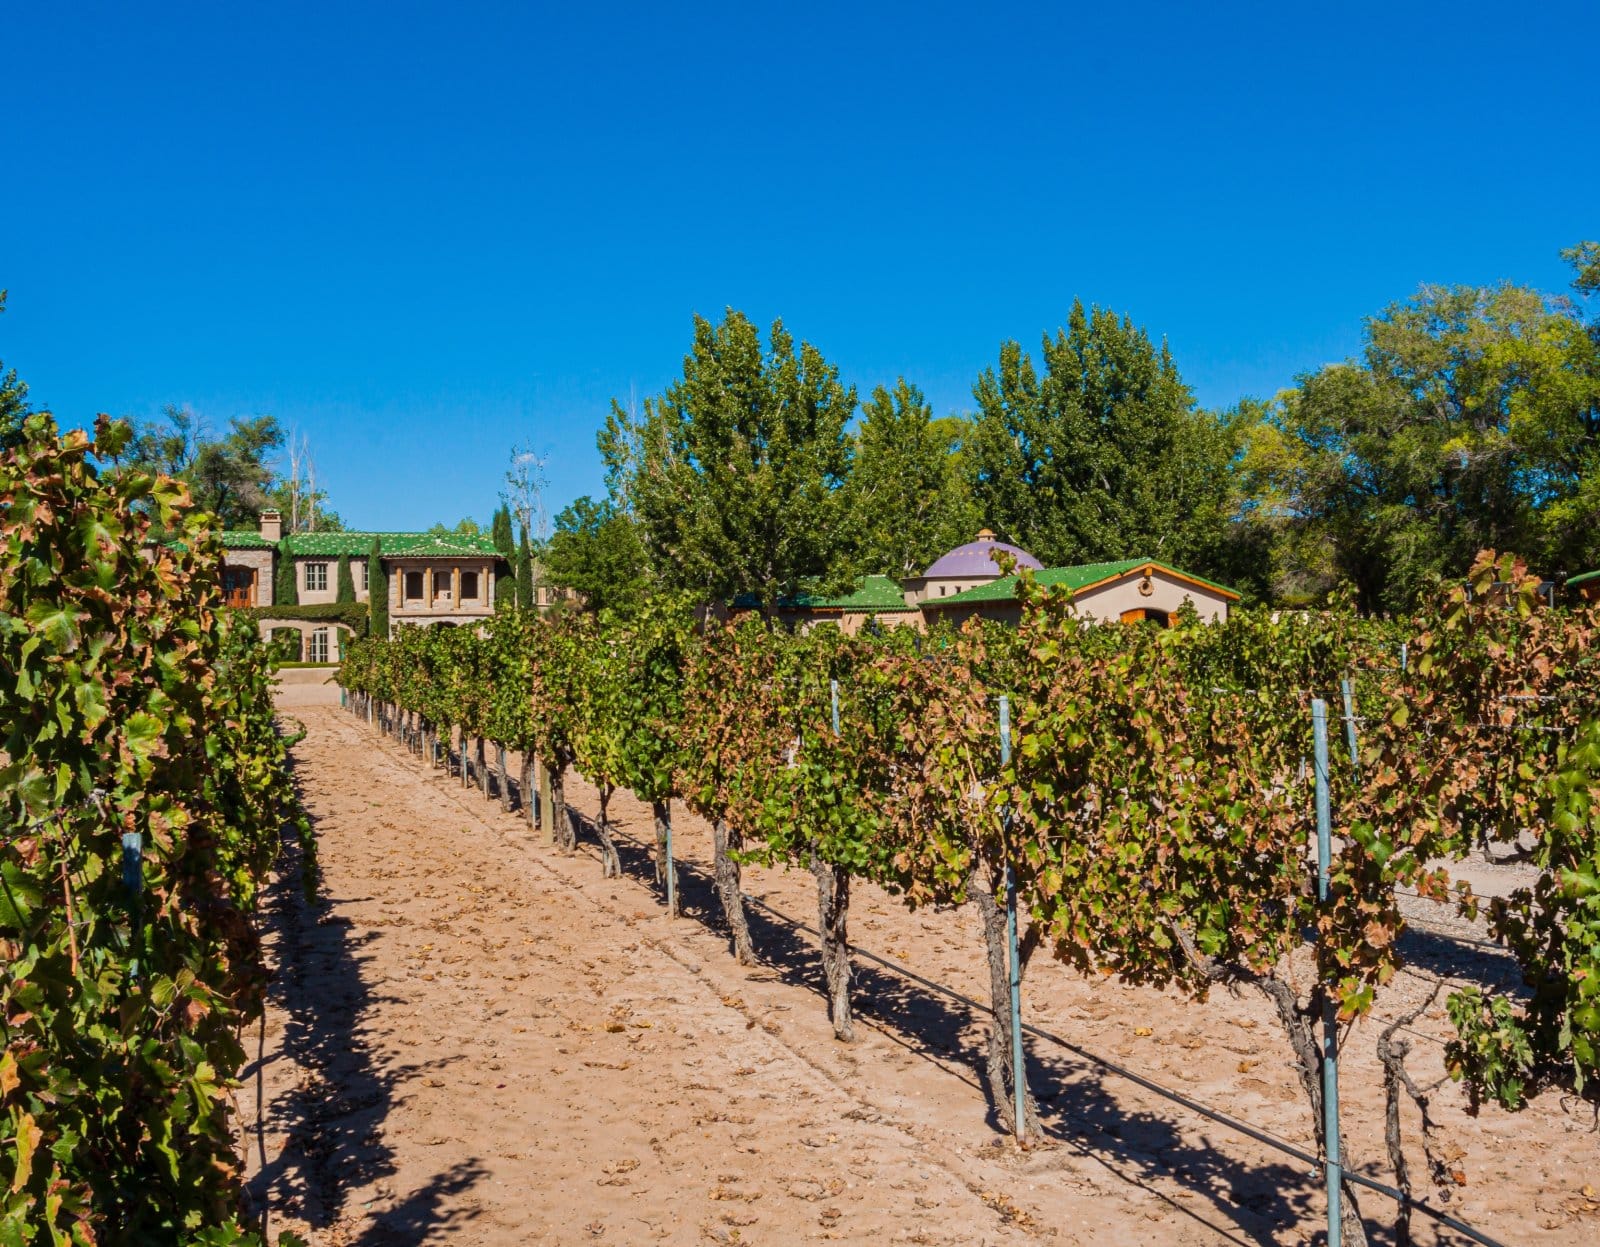 <p class="wp-caption-text">Image Credit: Shutterstock / Billy McDonald</p>  <p><span>Yes, New Mexico! As the oldest wine-producing state in the U.S., it offers a unique wine-tasting experience with its high elevation vineyards and Spanish-influenced wines.</span></p>